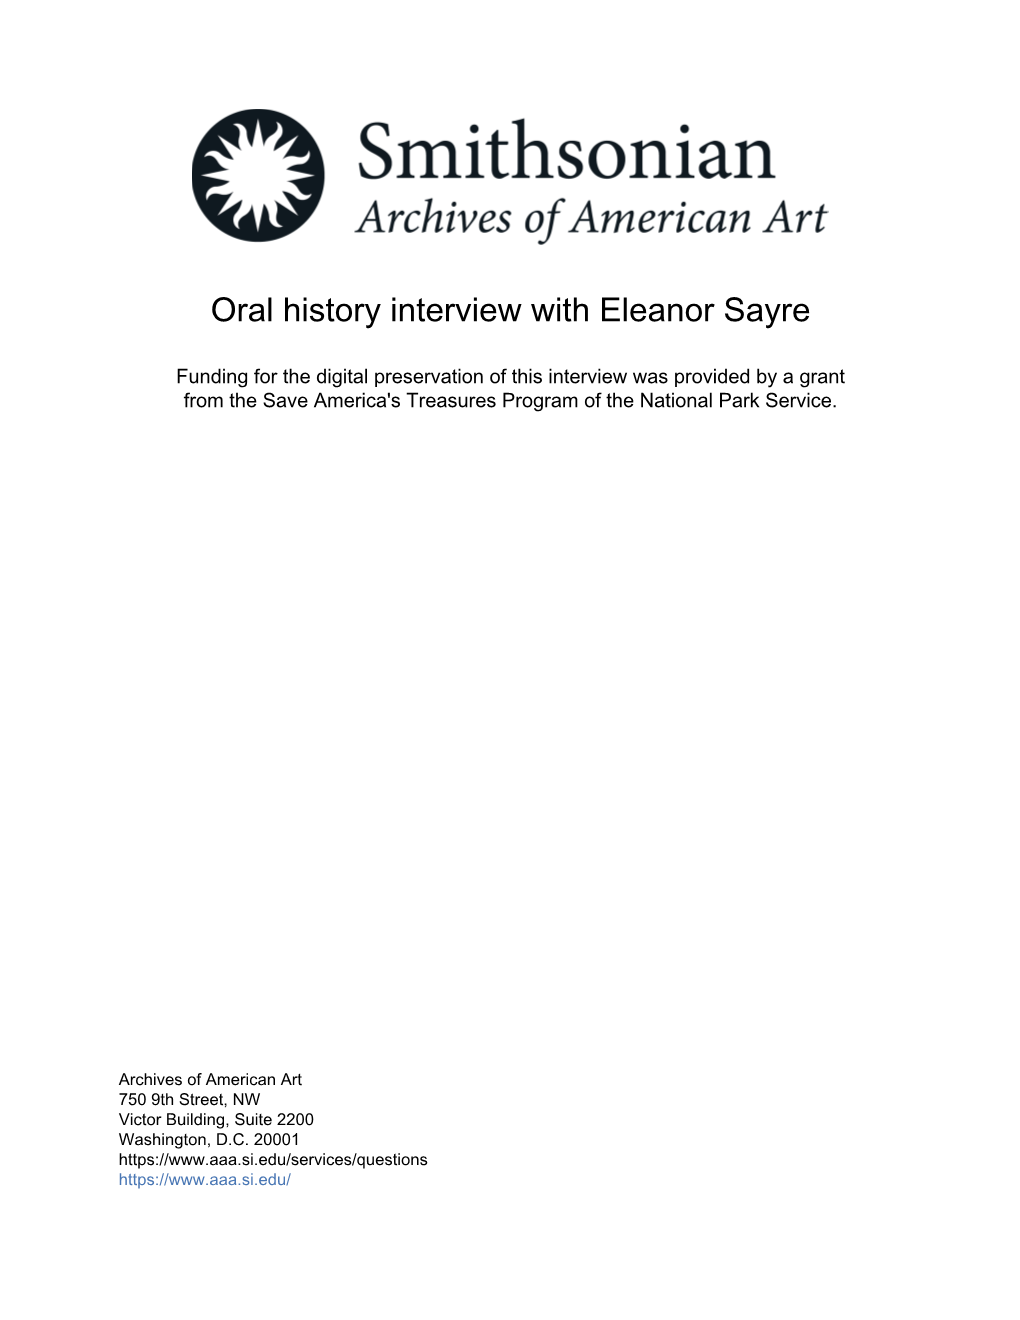 Oral History Interview with Eleanor Sayre